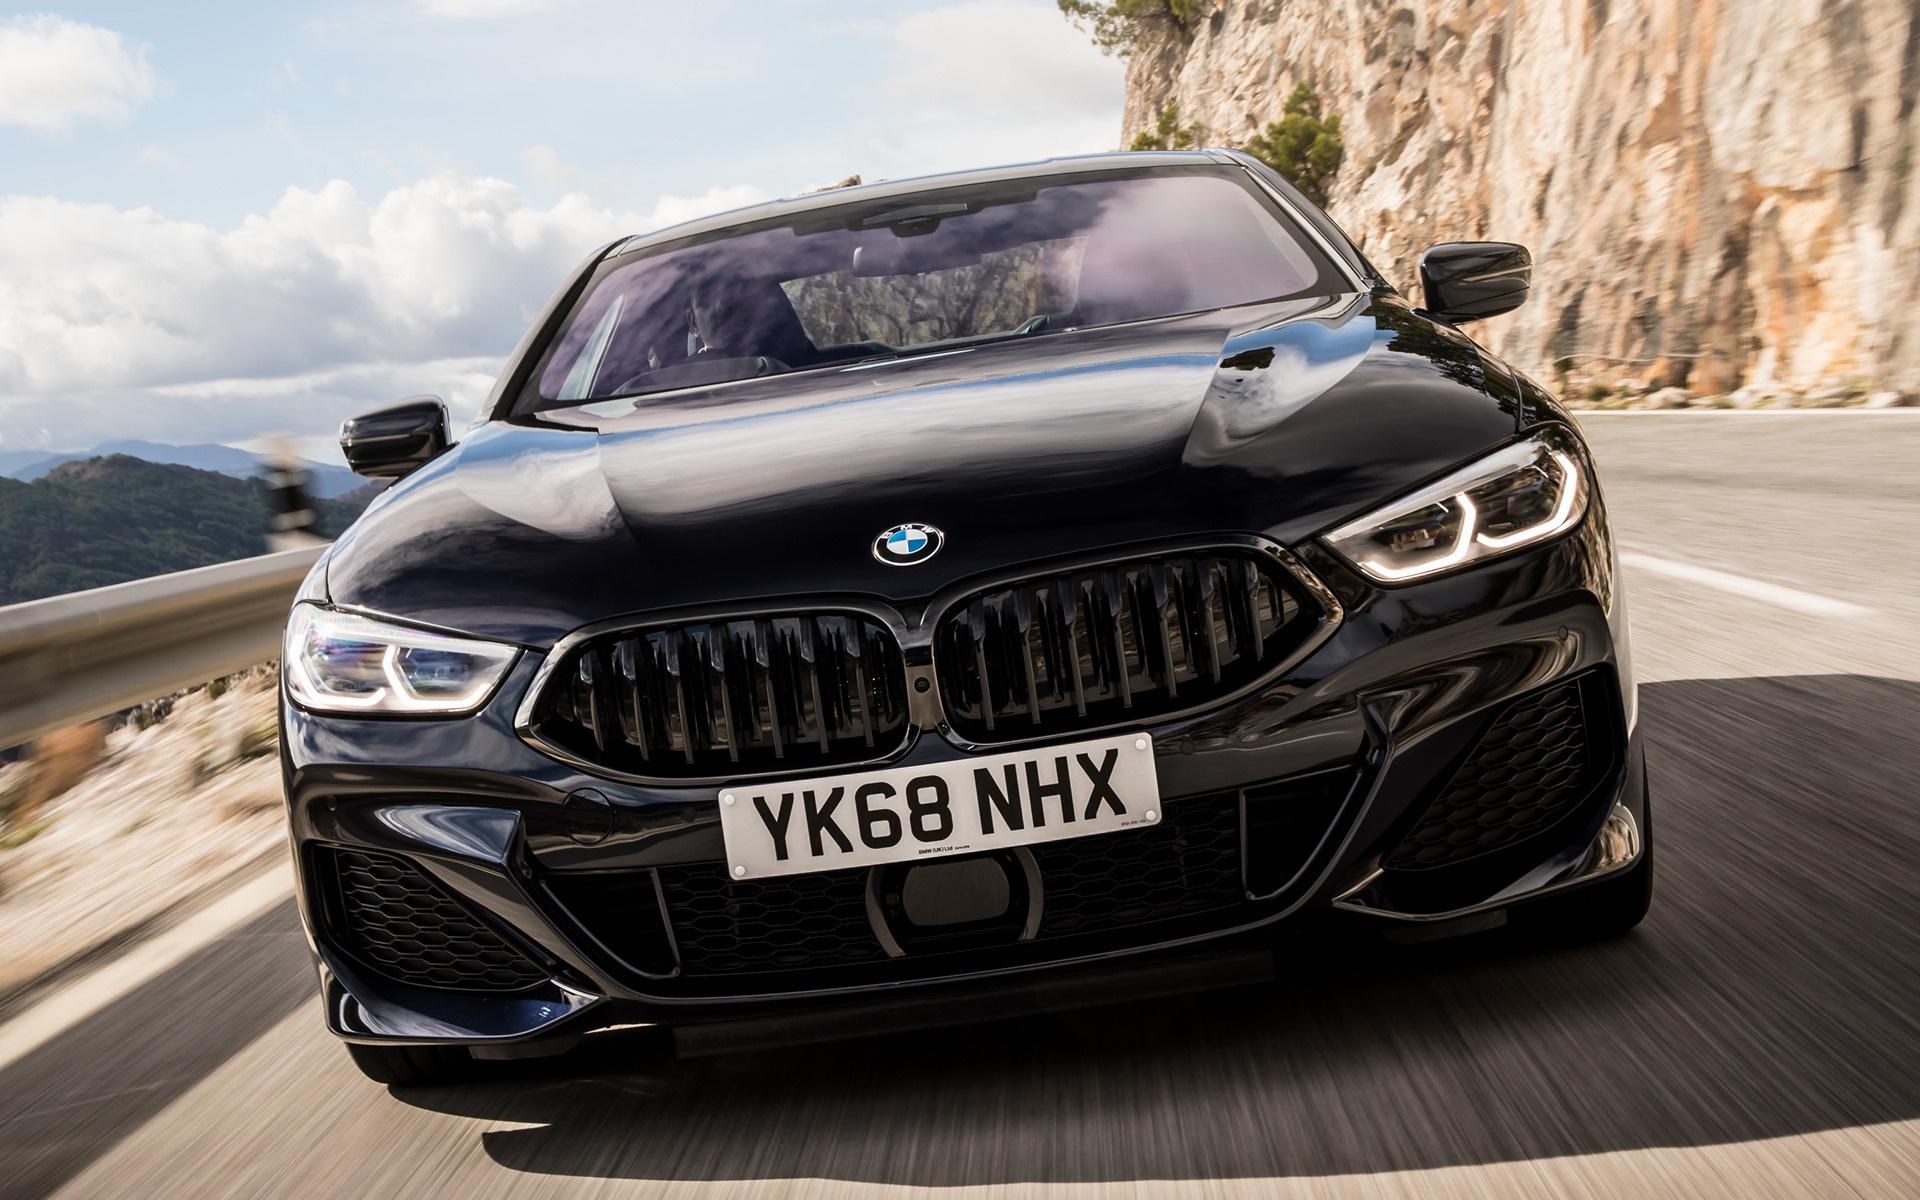 BMW 8 Series Coupe M Sport (UK) and HD Image